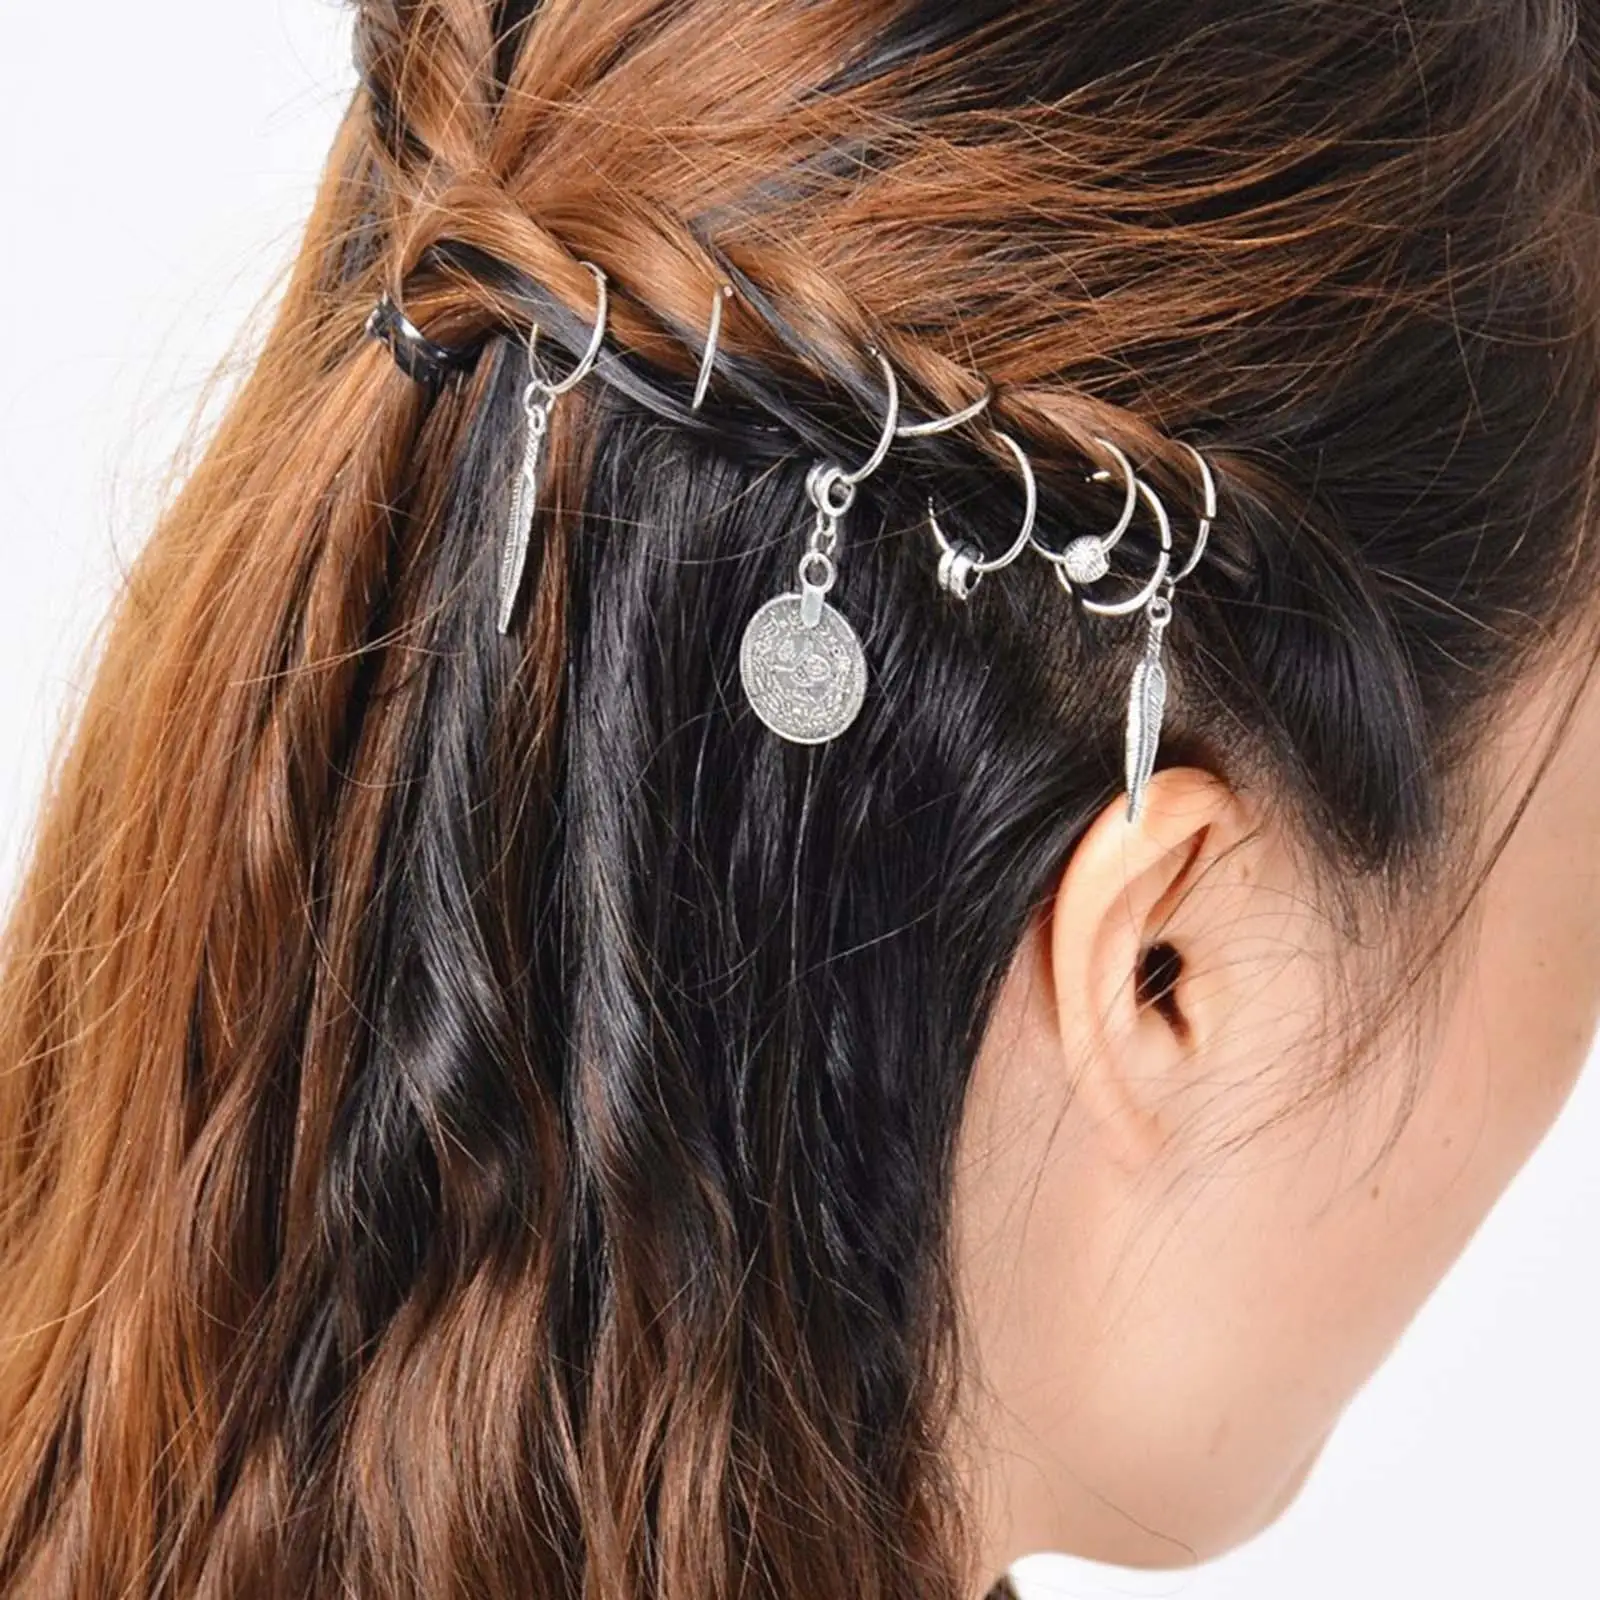 8 Pieces Hair Braid Dreadlock Clips Cuffs Rings jewelry 8 Styles Charms Women Braids Accessories Pendant Retro Style DIY